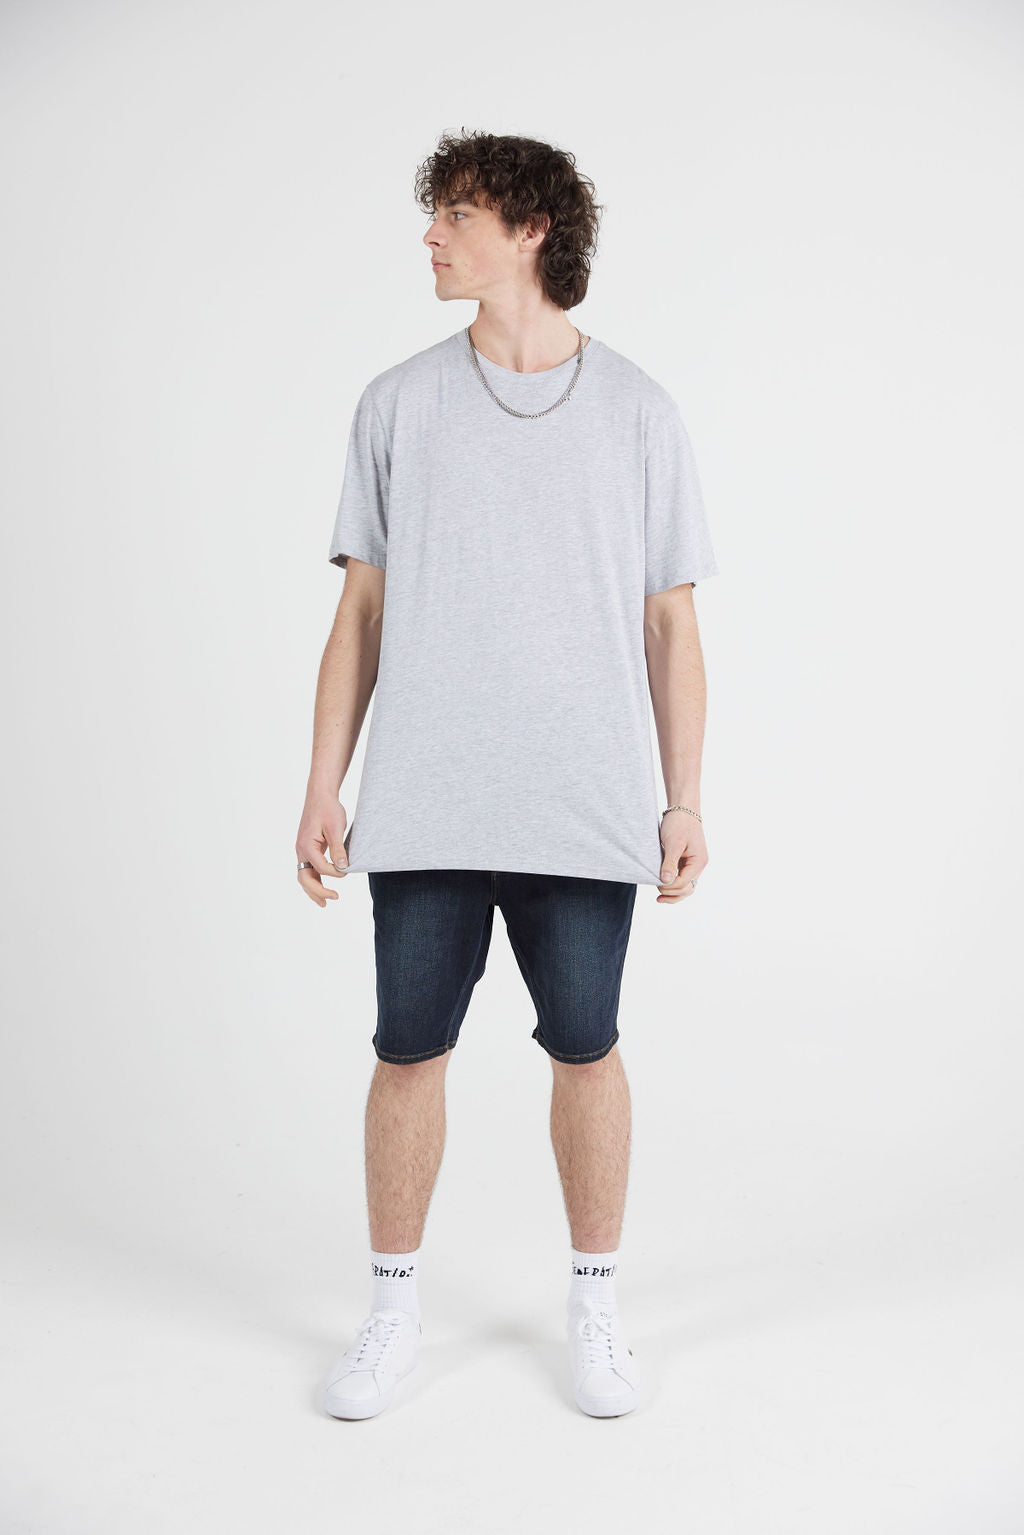 MENS SOLID TEE - GREY MARLE (2FOR60)